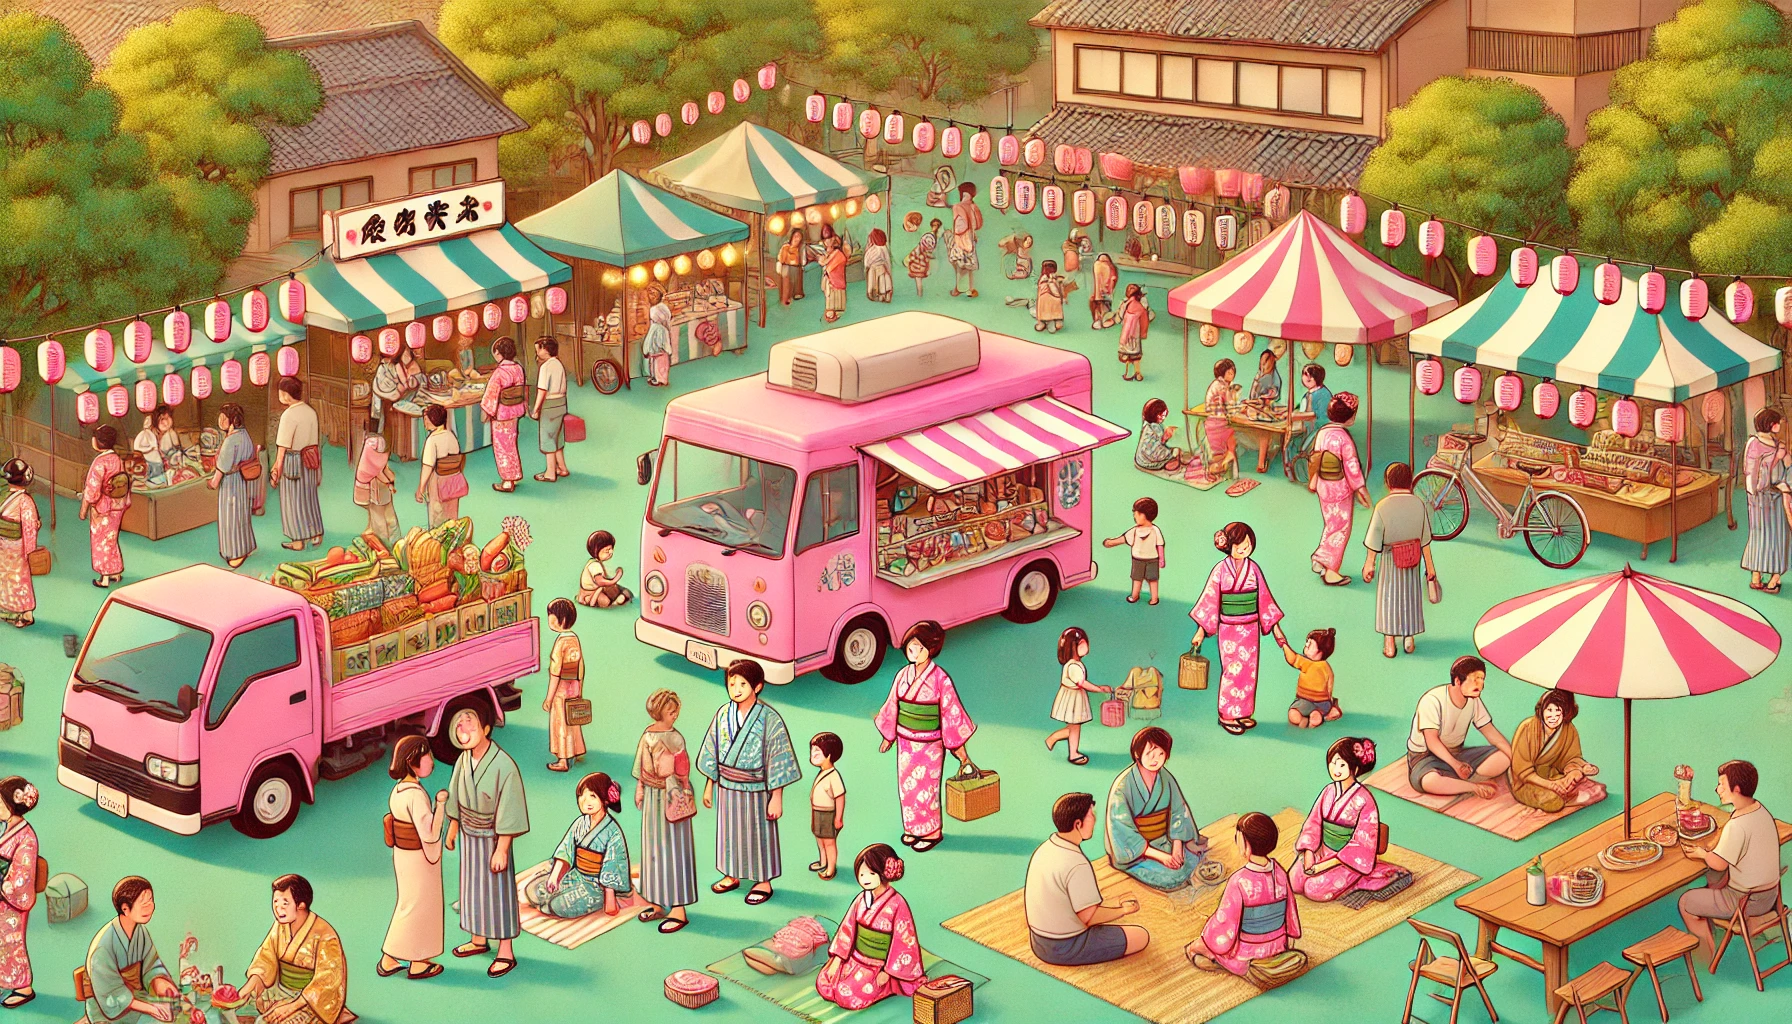 A vibrant summer festival scene in Japan with a colorful pink food truck serving a crowd of happy Japanese families and children. The setting is simil